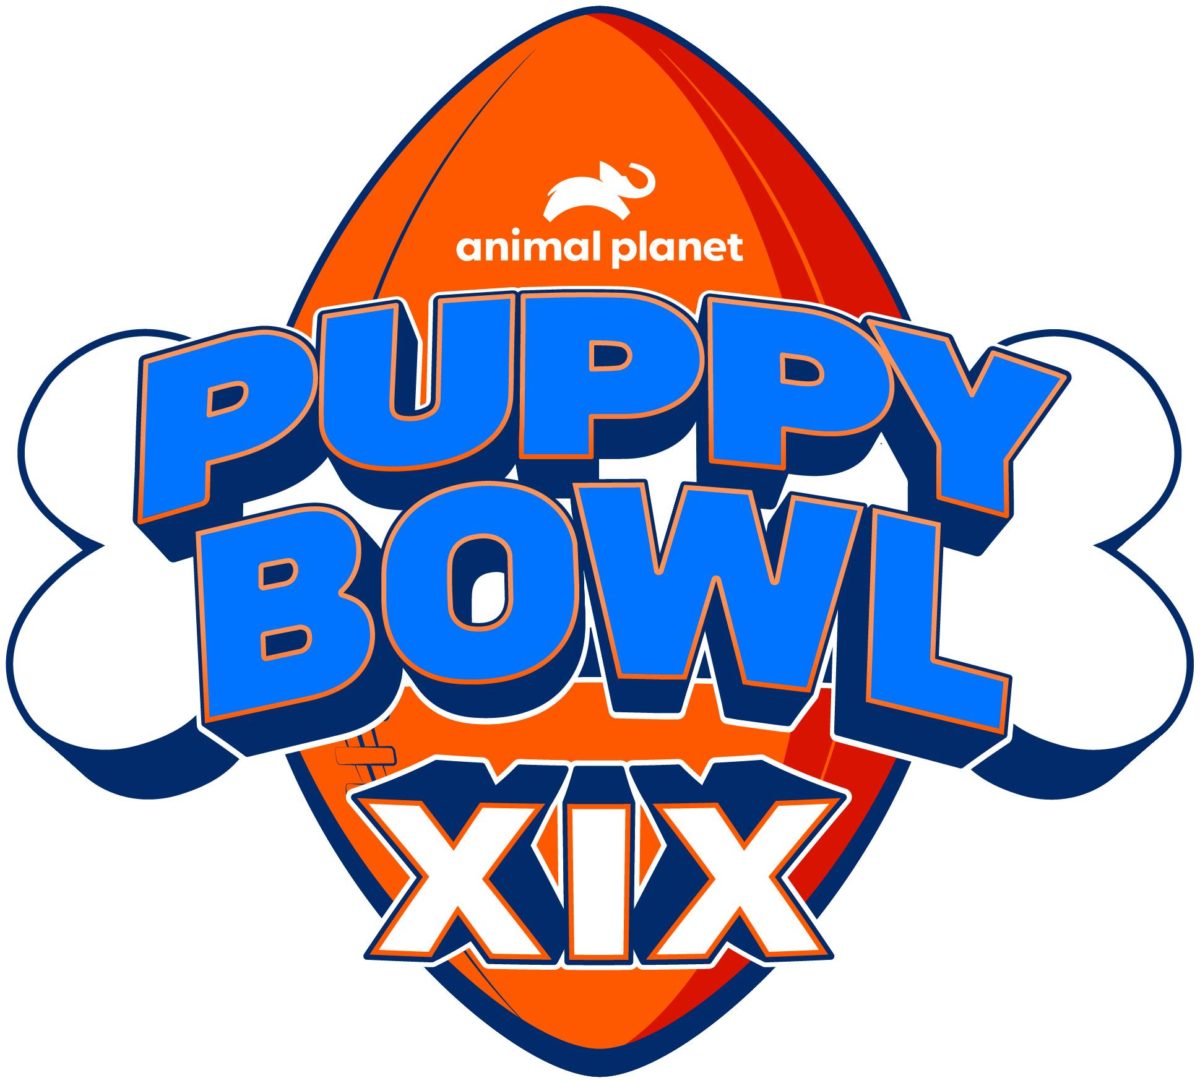 Photo of Puppy Bowl XIX Pawprint Grows Across Warner Bros. Discovery’s Platforms